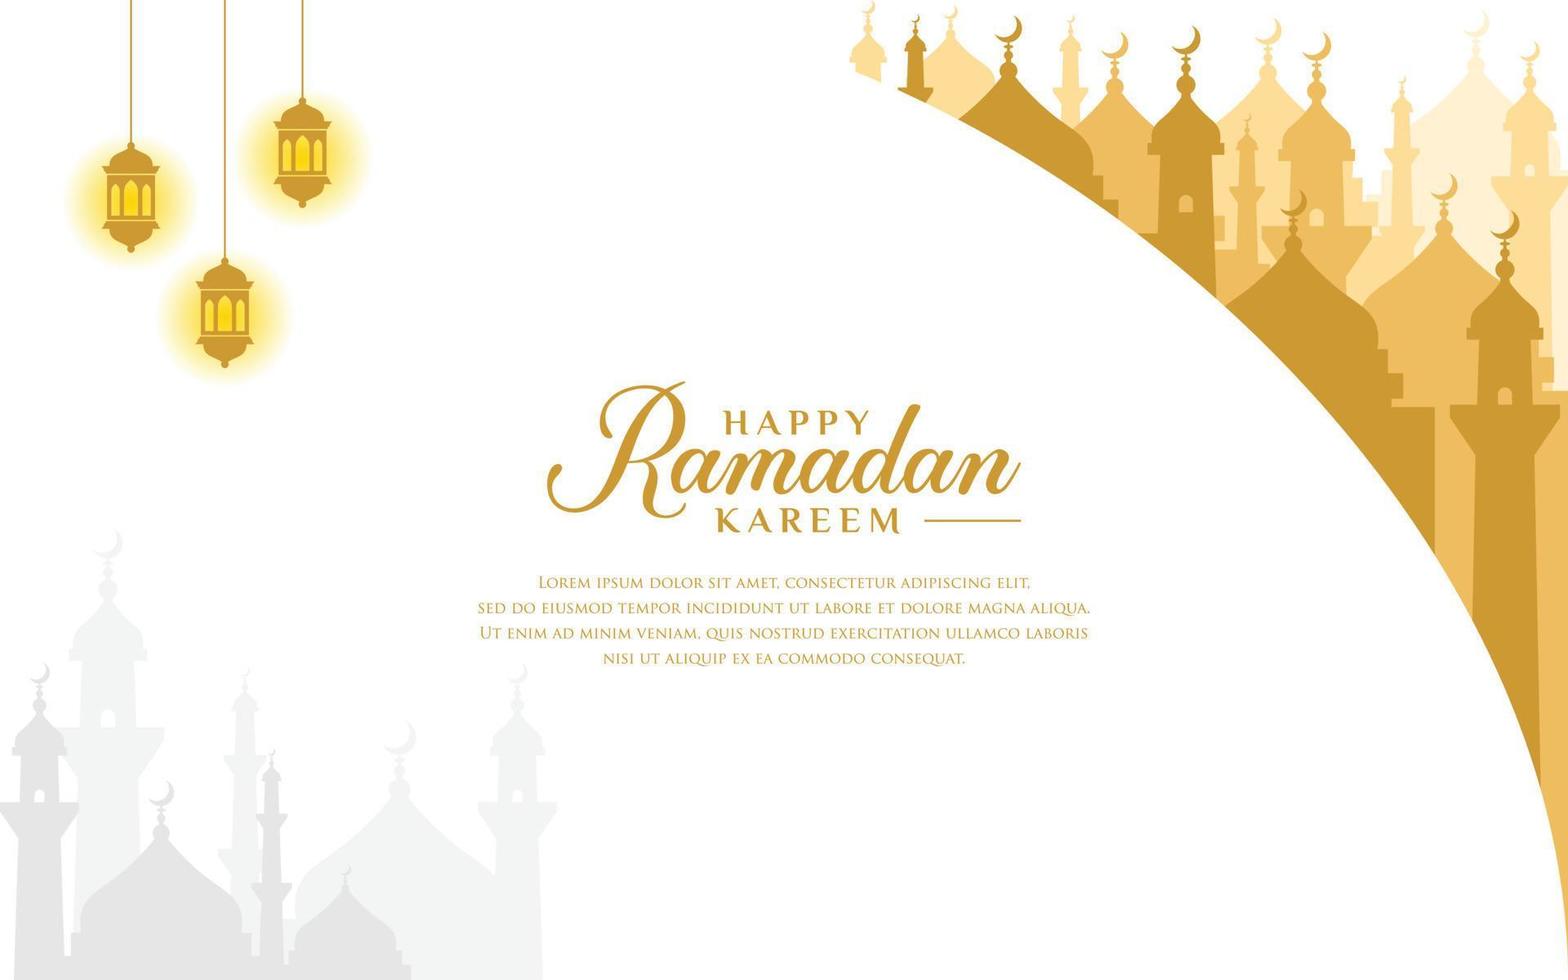 Vector graphic of ramadan kareem background, suitable for banners, greeting cards, flyers, invitations, poster designs.